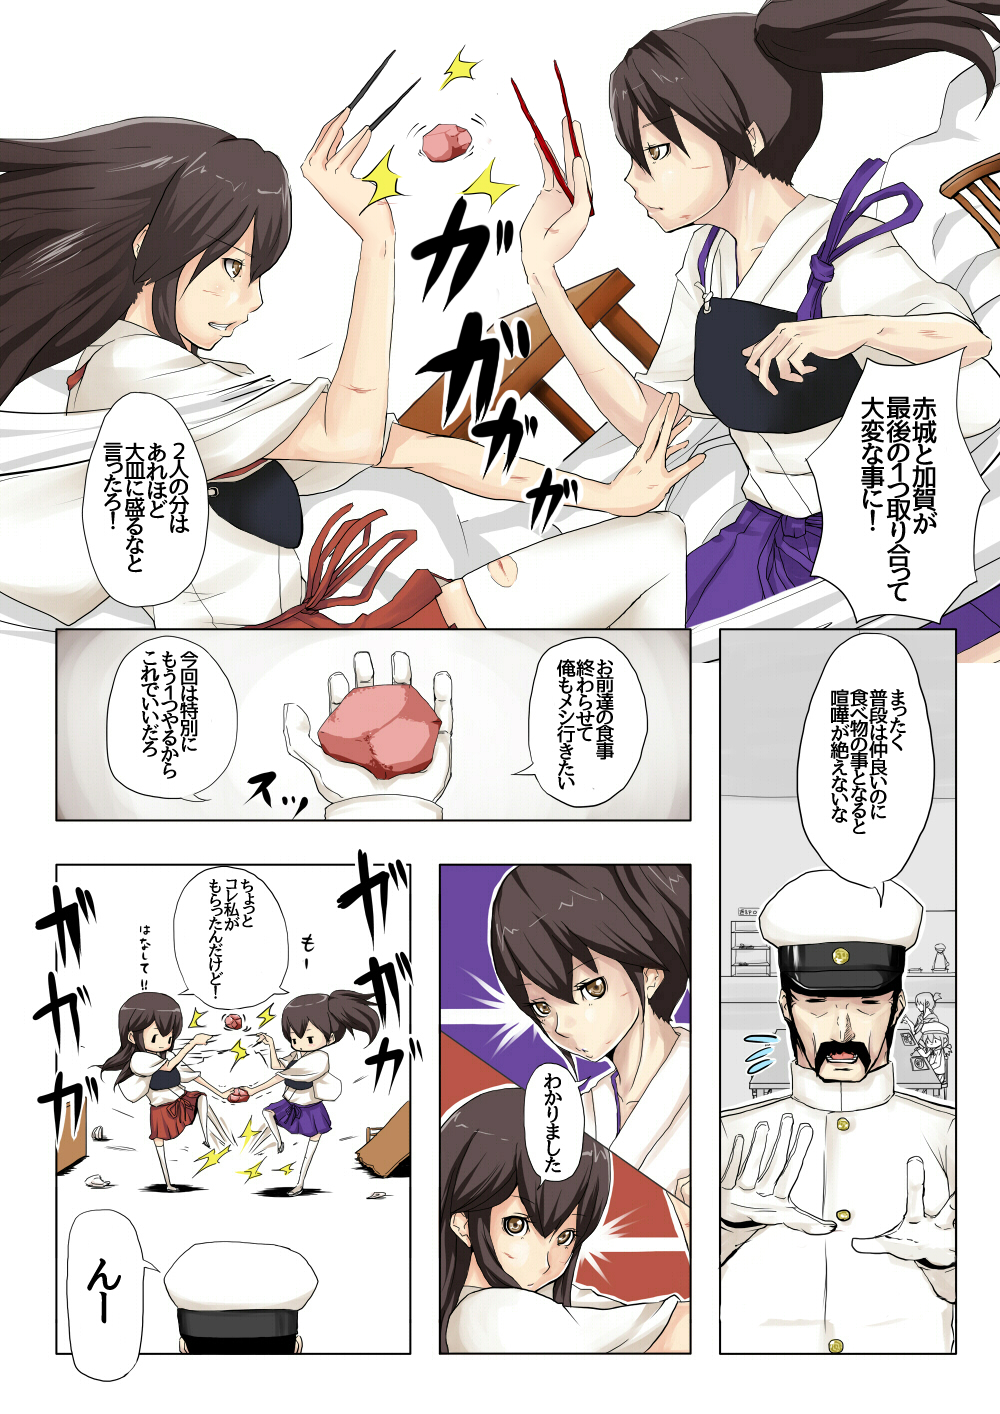 4girls admiral_(kantai_collection) akagi_(kantai_collection) bauxite broken brown_eyes brown_hair bruise chair chopsticks comic error_musume facial_hair fighting flying_sweatdrops girl_holding_a_cat_(kantai_collection) giving gloves highres inazuma_(kantai_collection) injury japanese_clothes kaga_(kantai_collection) kantai_collection kicking long_hair military military_uniform multiple_girls muneate mustache naval_uniform satsumaimo_pai short_hair side_ponytail table thighhighs torn_clothes torn_legwear translation_request uniform